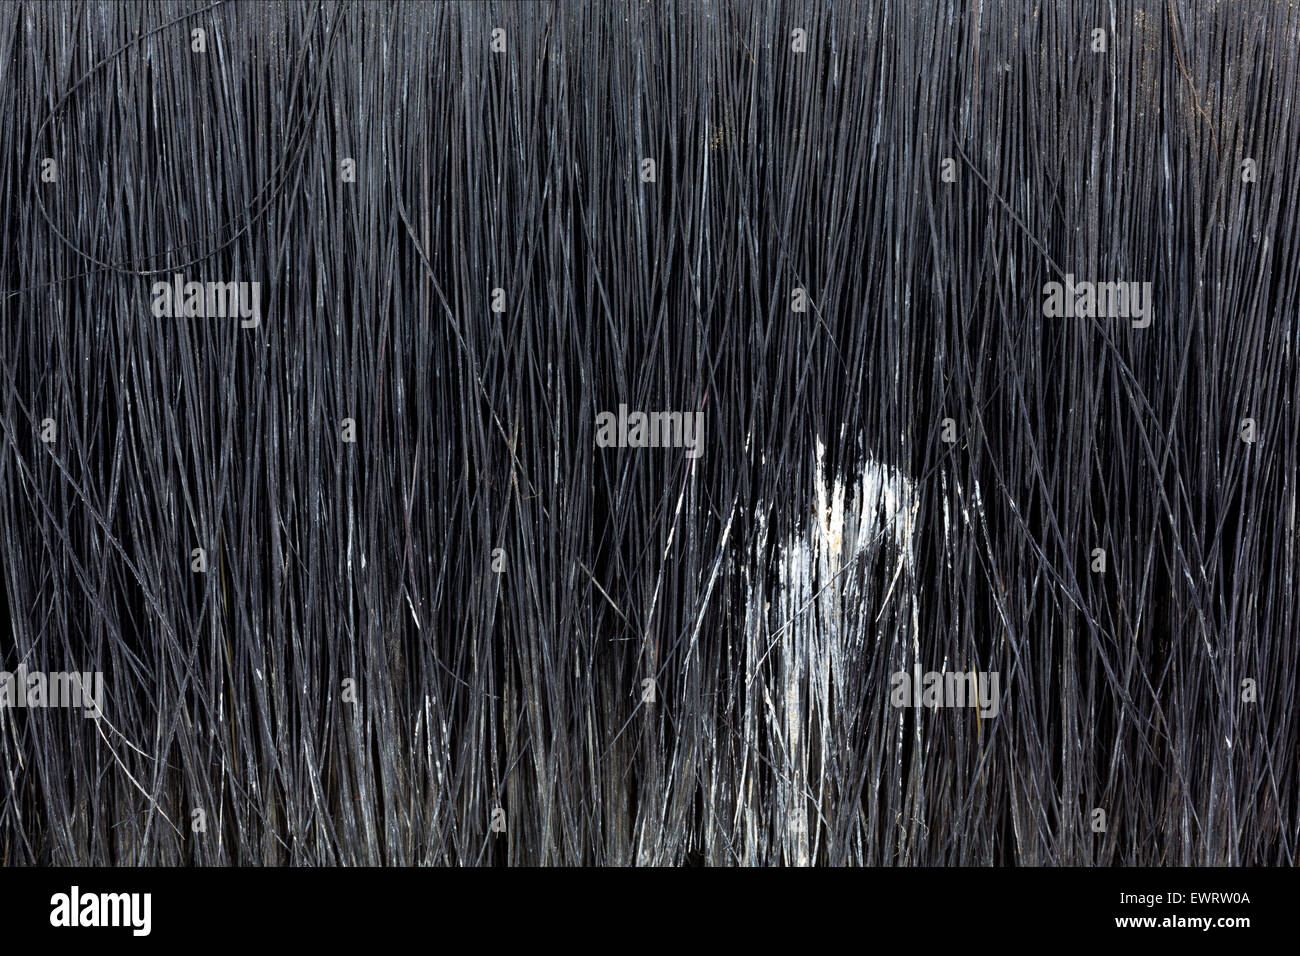 A very close view of a worn black bristle paintbrush with dried white paint. Stock Photo